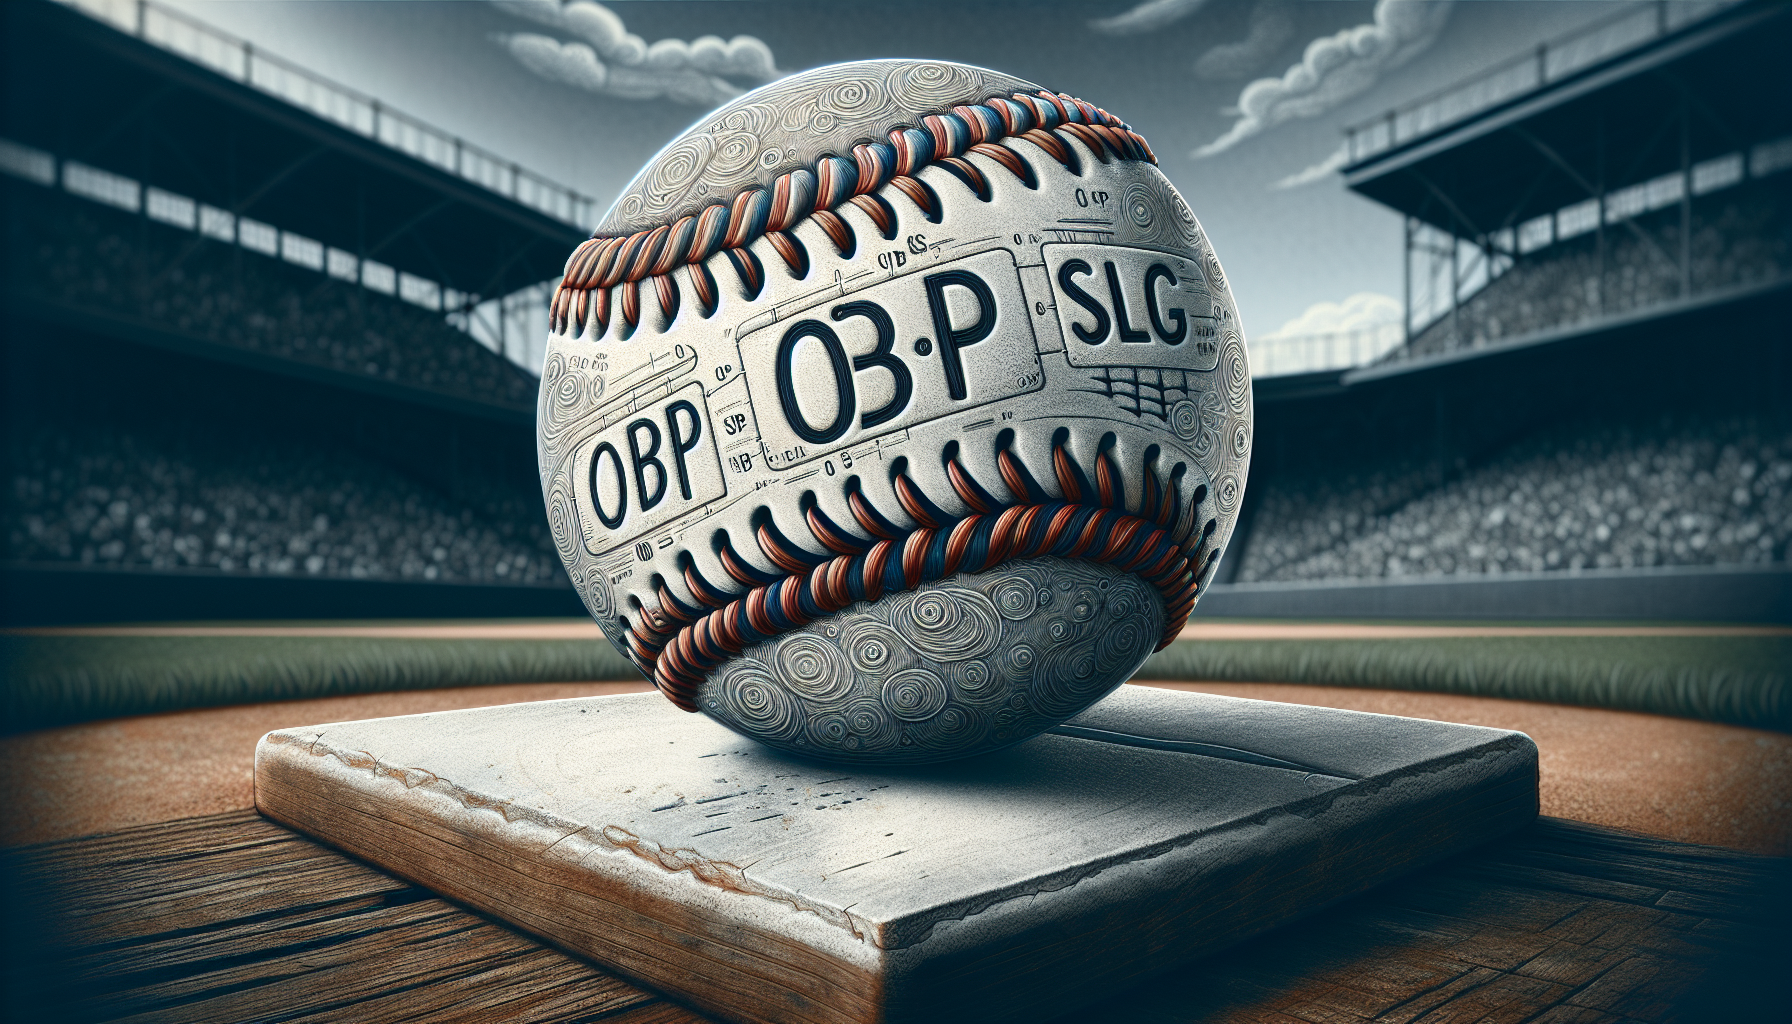 Illustration of baseball with OBP and SLG labels